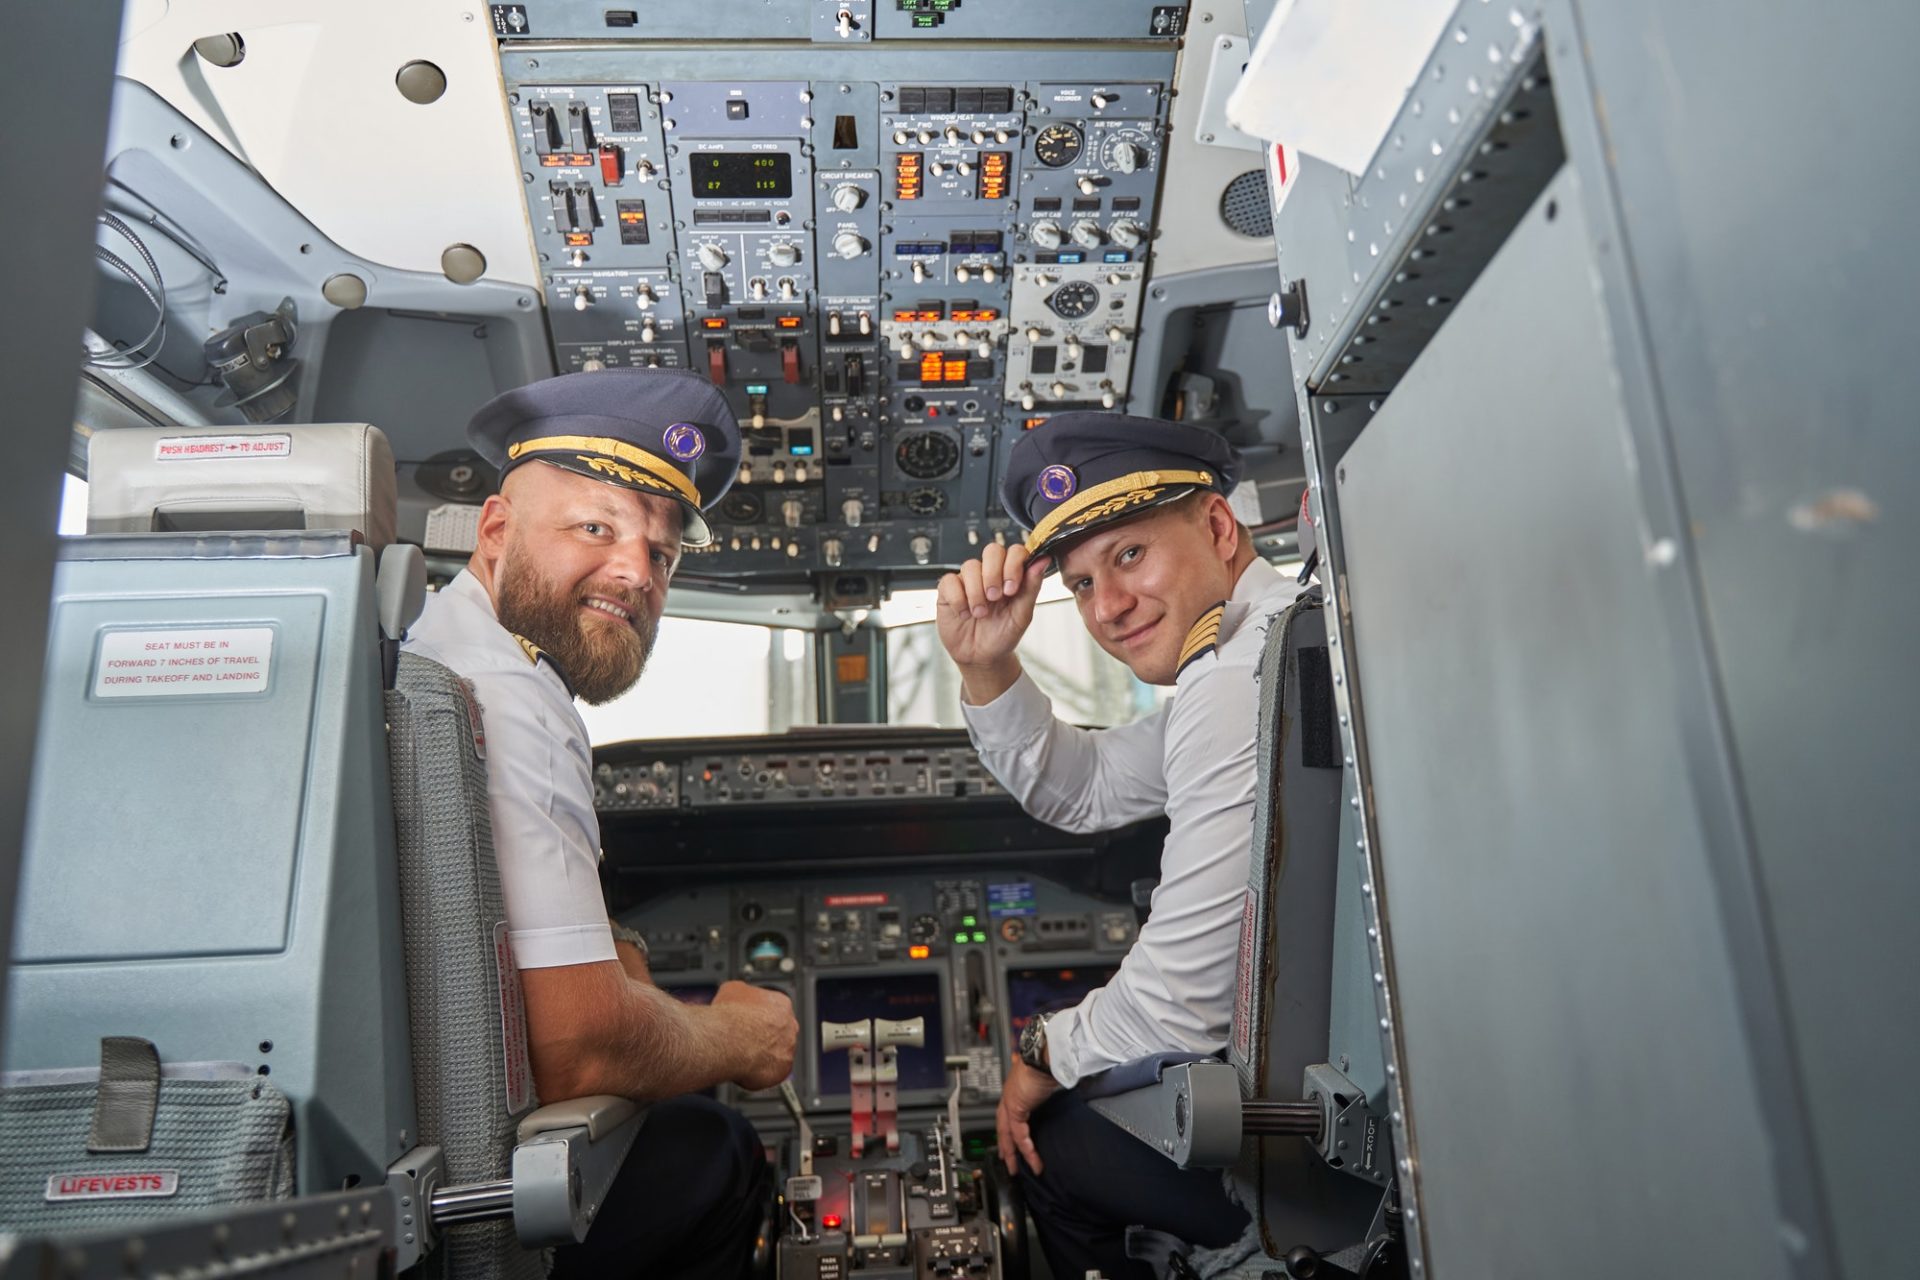 view-of-the-flight-deck-and-two-friendly-pilots-in-it-e1630639574889.jpg